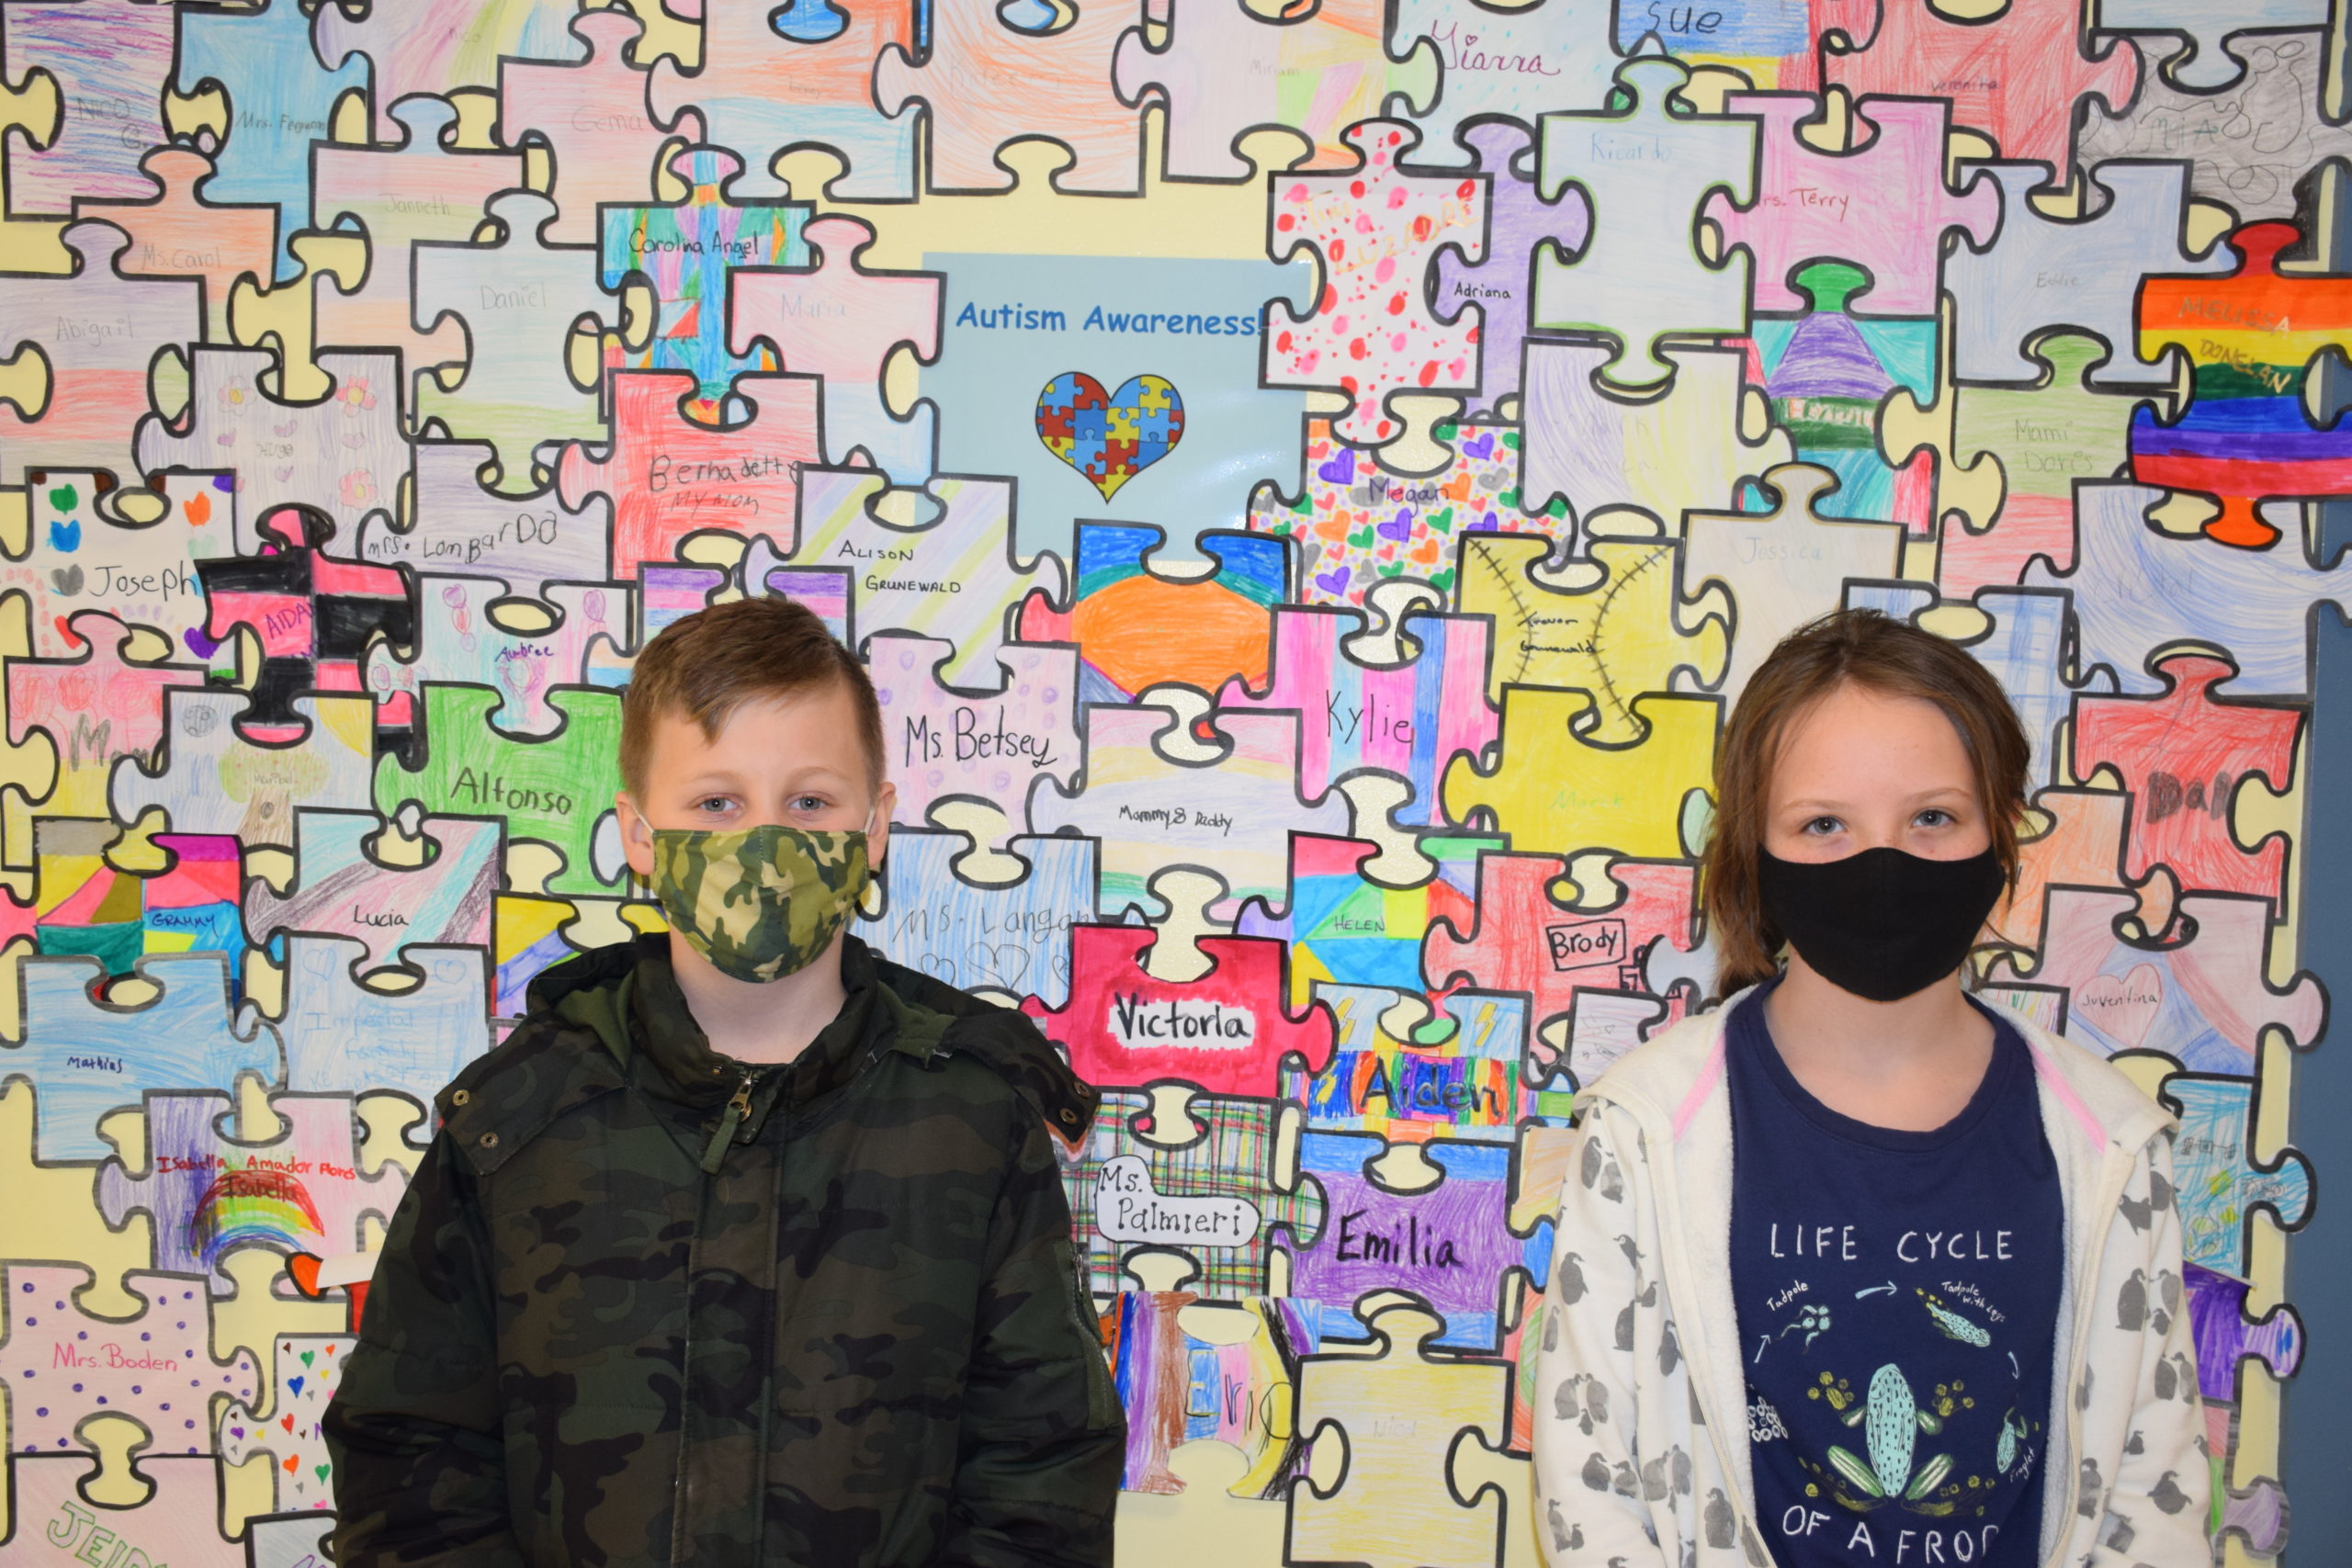 Members of Hampton Bays Elementary School’s service club, K-Kids, recently raised $200 for Camp Flying Point in Southampton as part of an annual autism awareness fundraiser. The club sold paper puzzle pieces that had been colored by students and then displayed in the school’s main hallway.